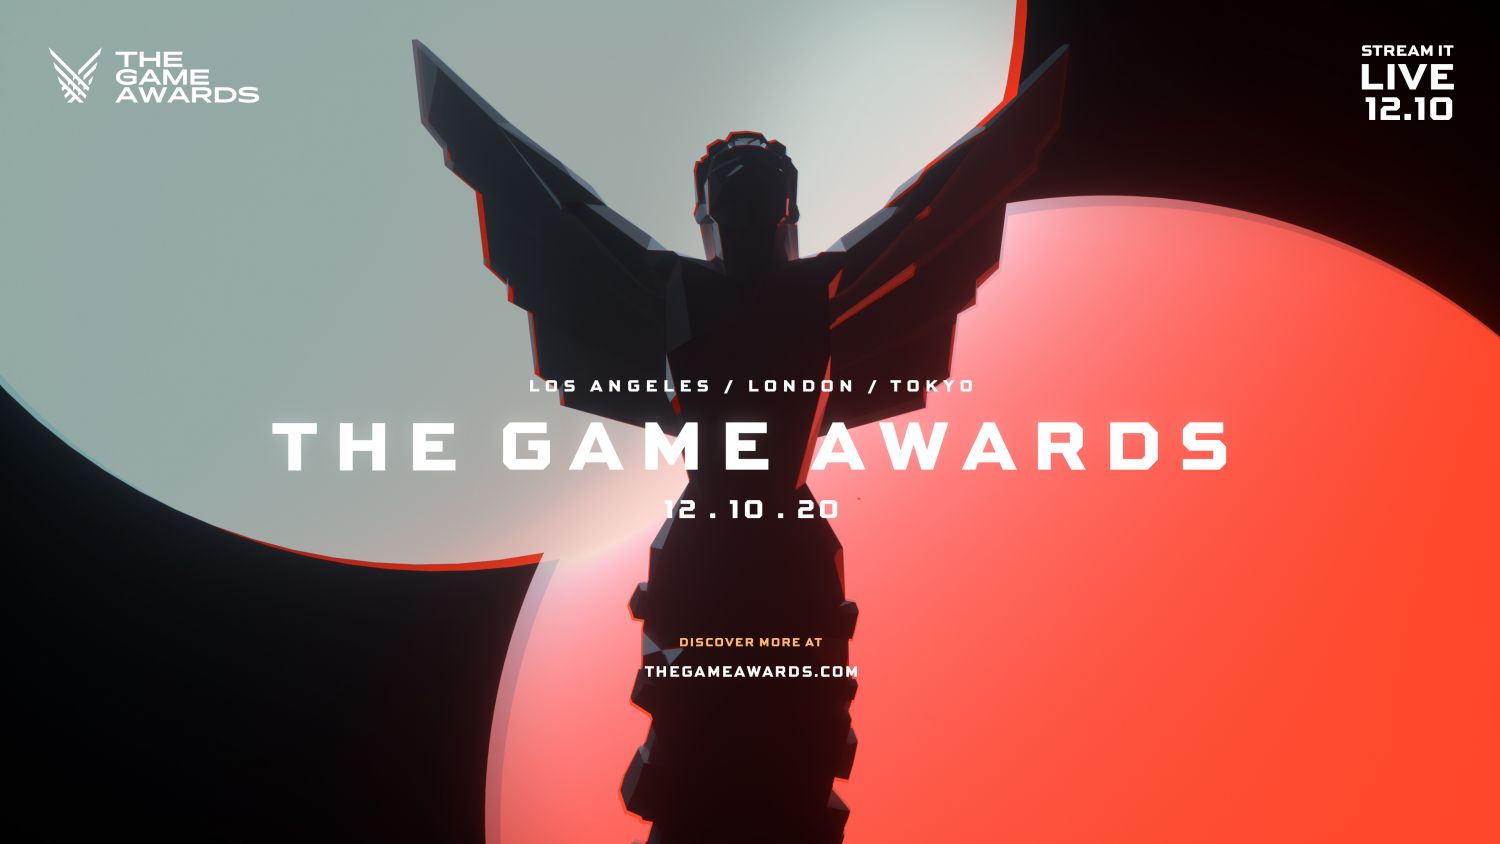 What is happening? #TheGameAwards